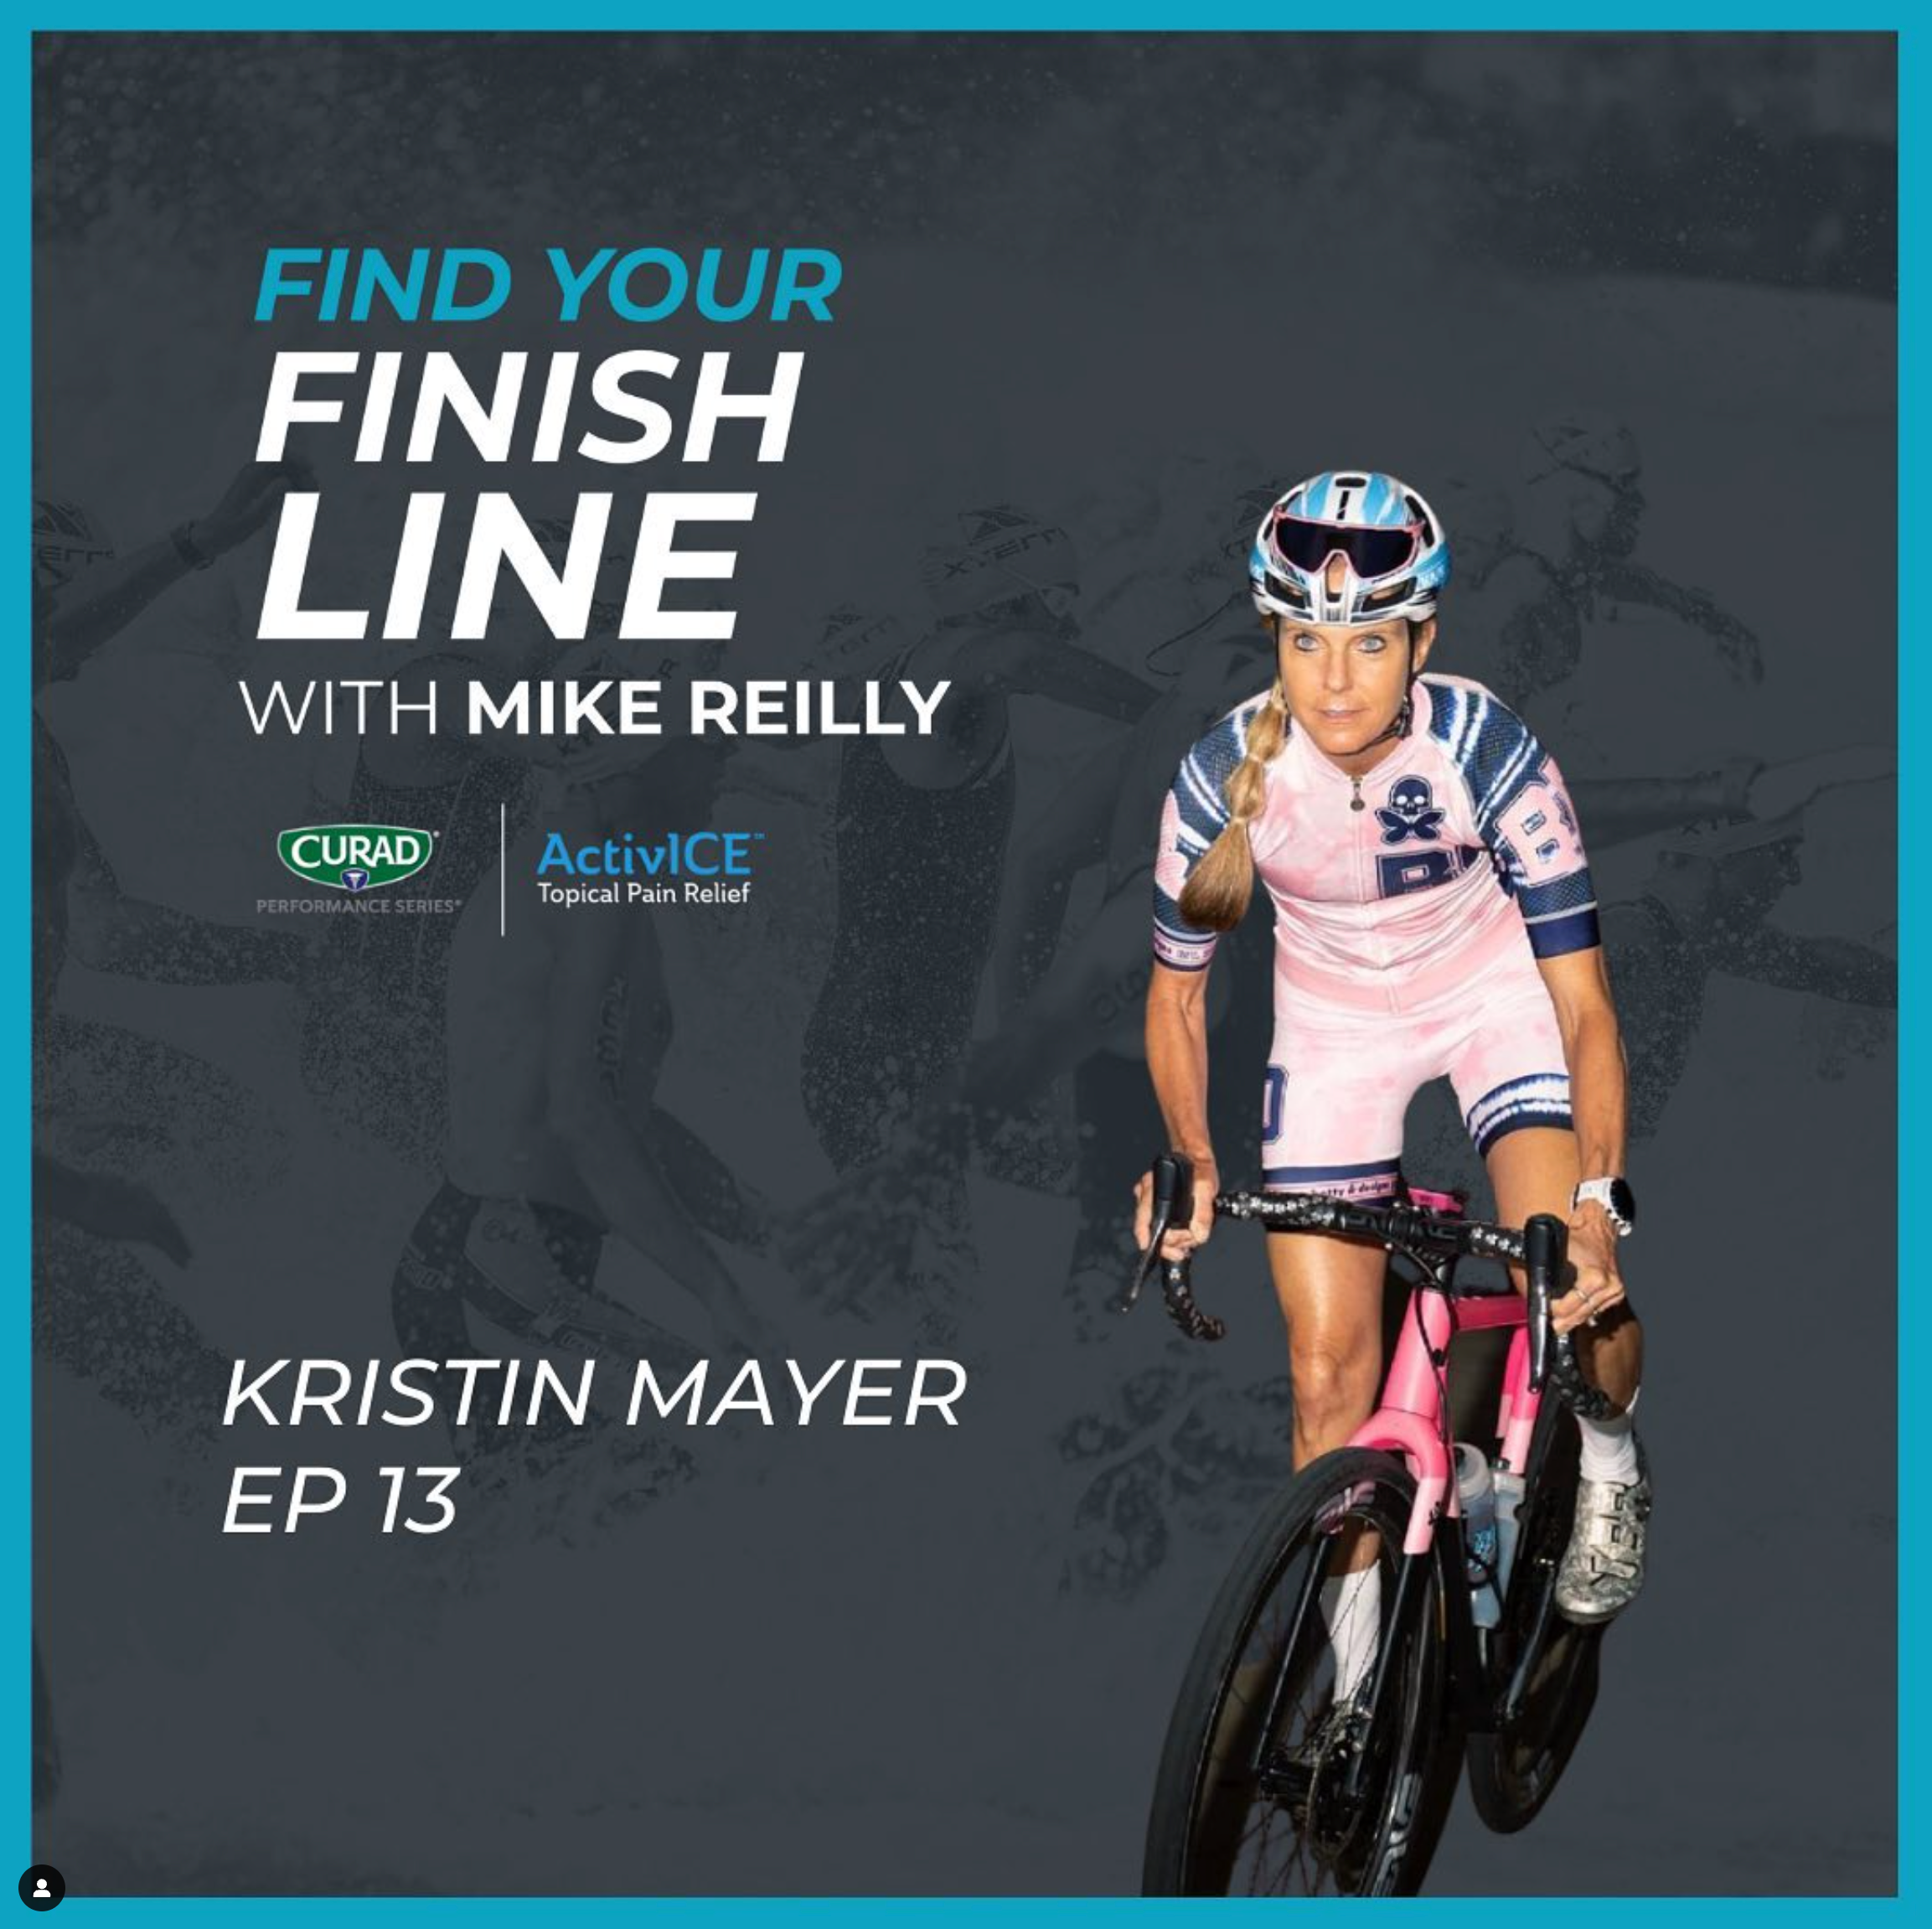 KRISTIN MAYER INTERVIEWED ON FIND YOUR FINISH LINE WITH MIKE REILLY